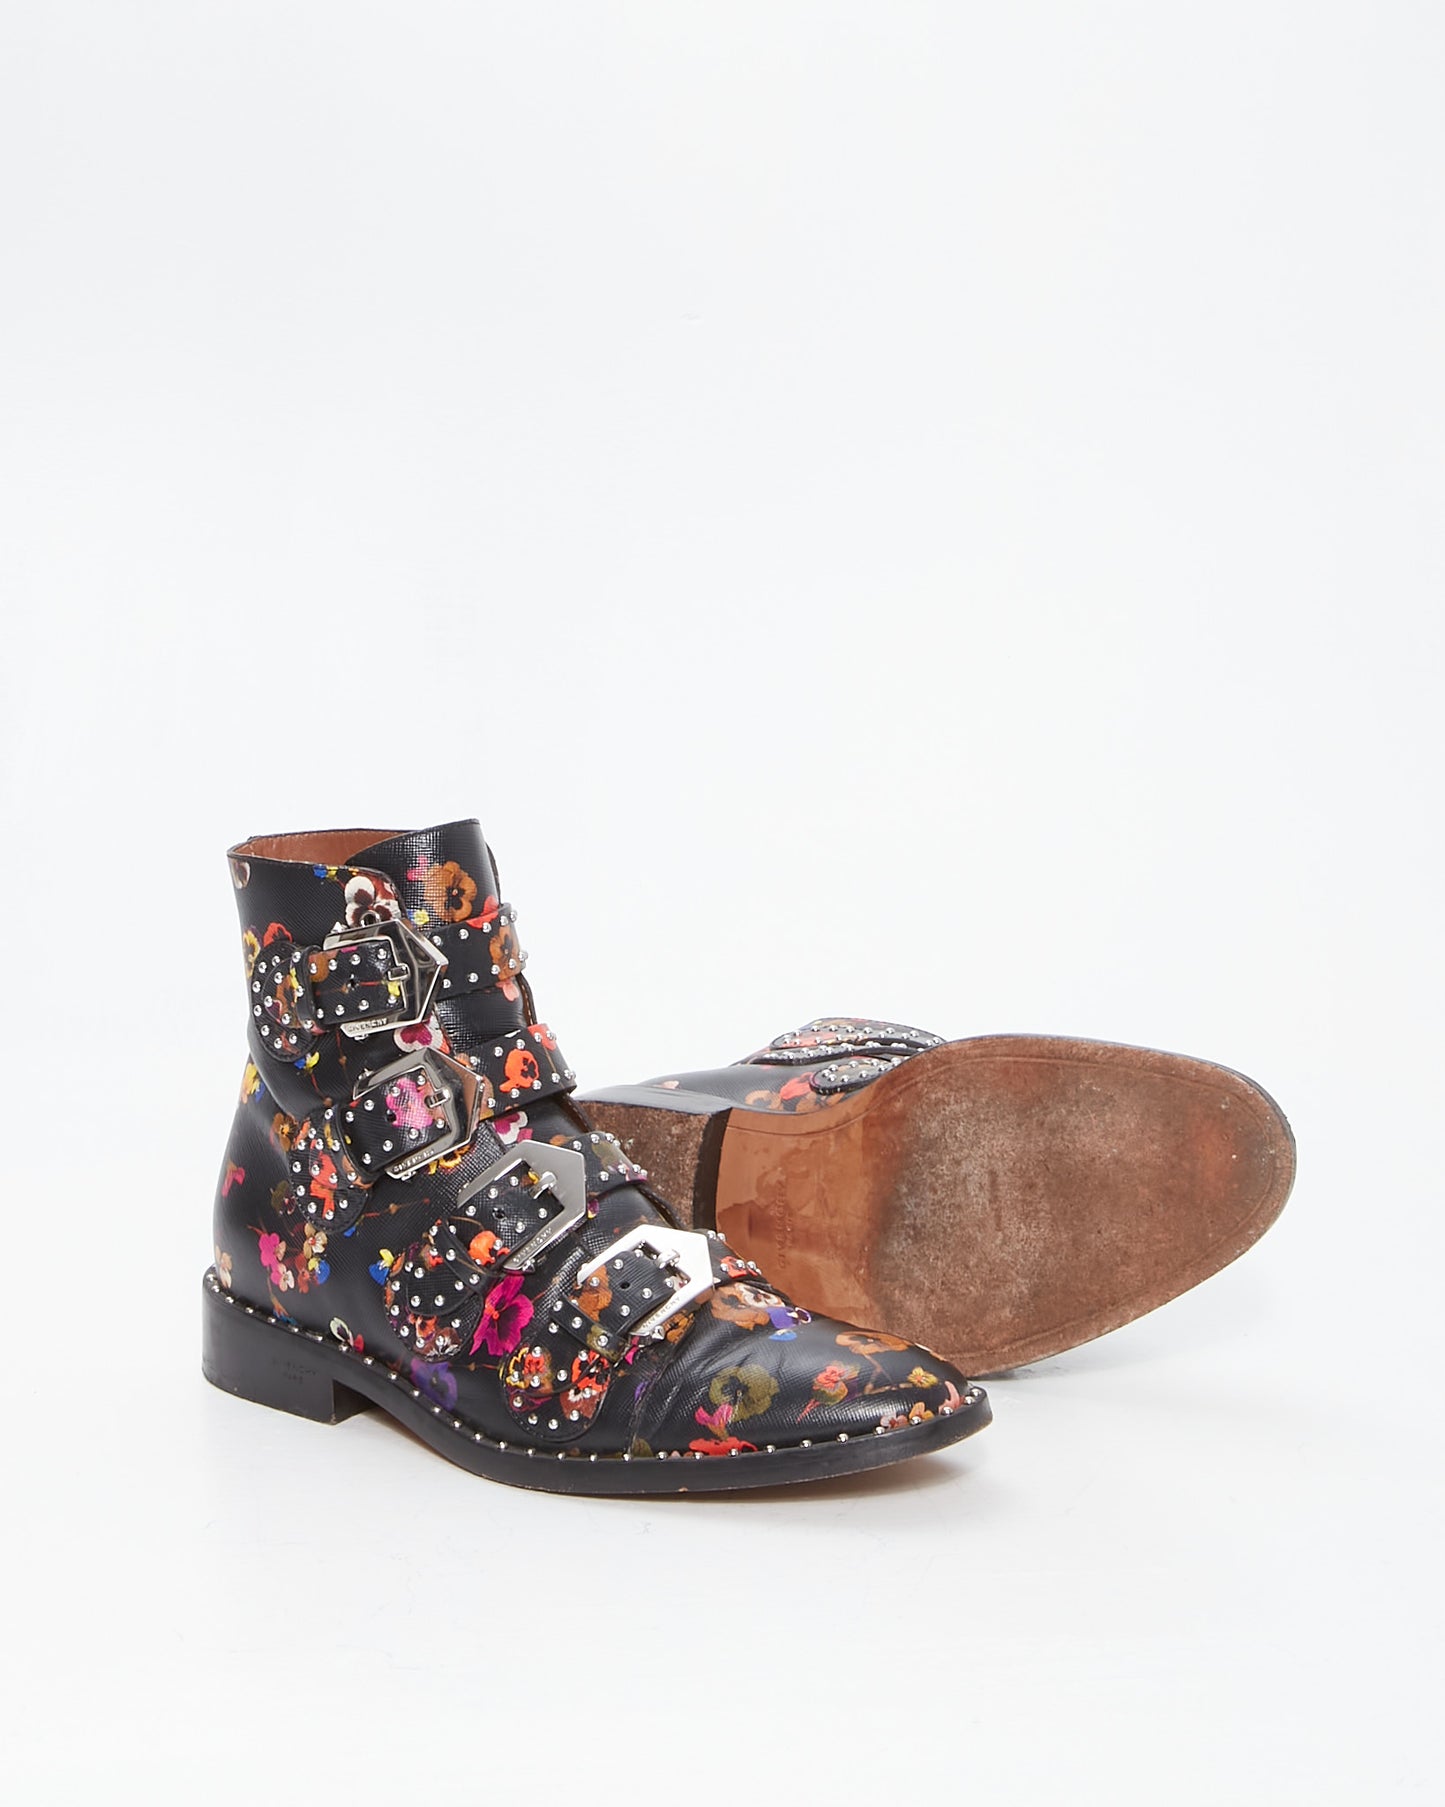 Givenchy Floral Studded Buckled Chelsea Boots - 8